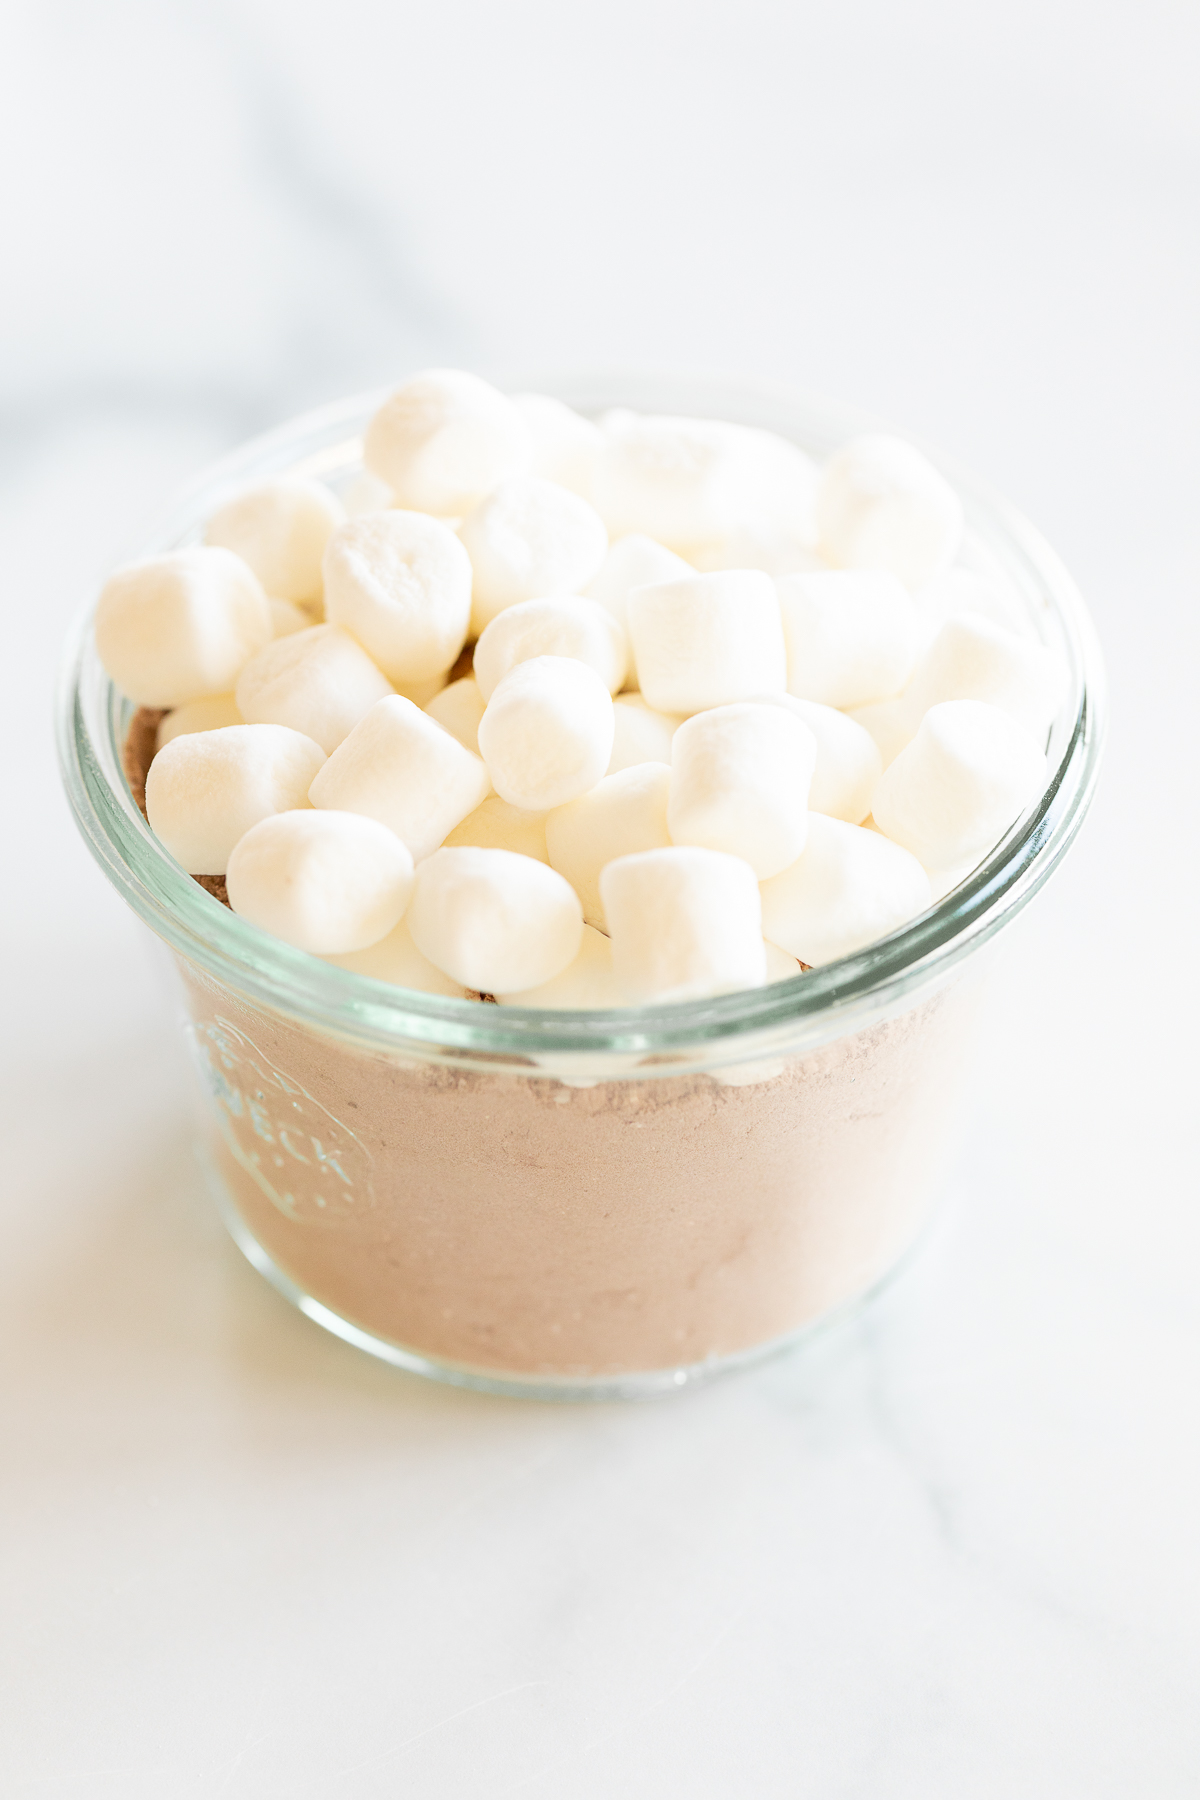 Homemade hot chocolate with marshmallows in a glass bowl on a white surface.